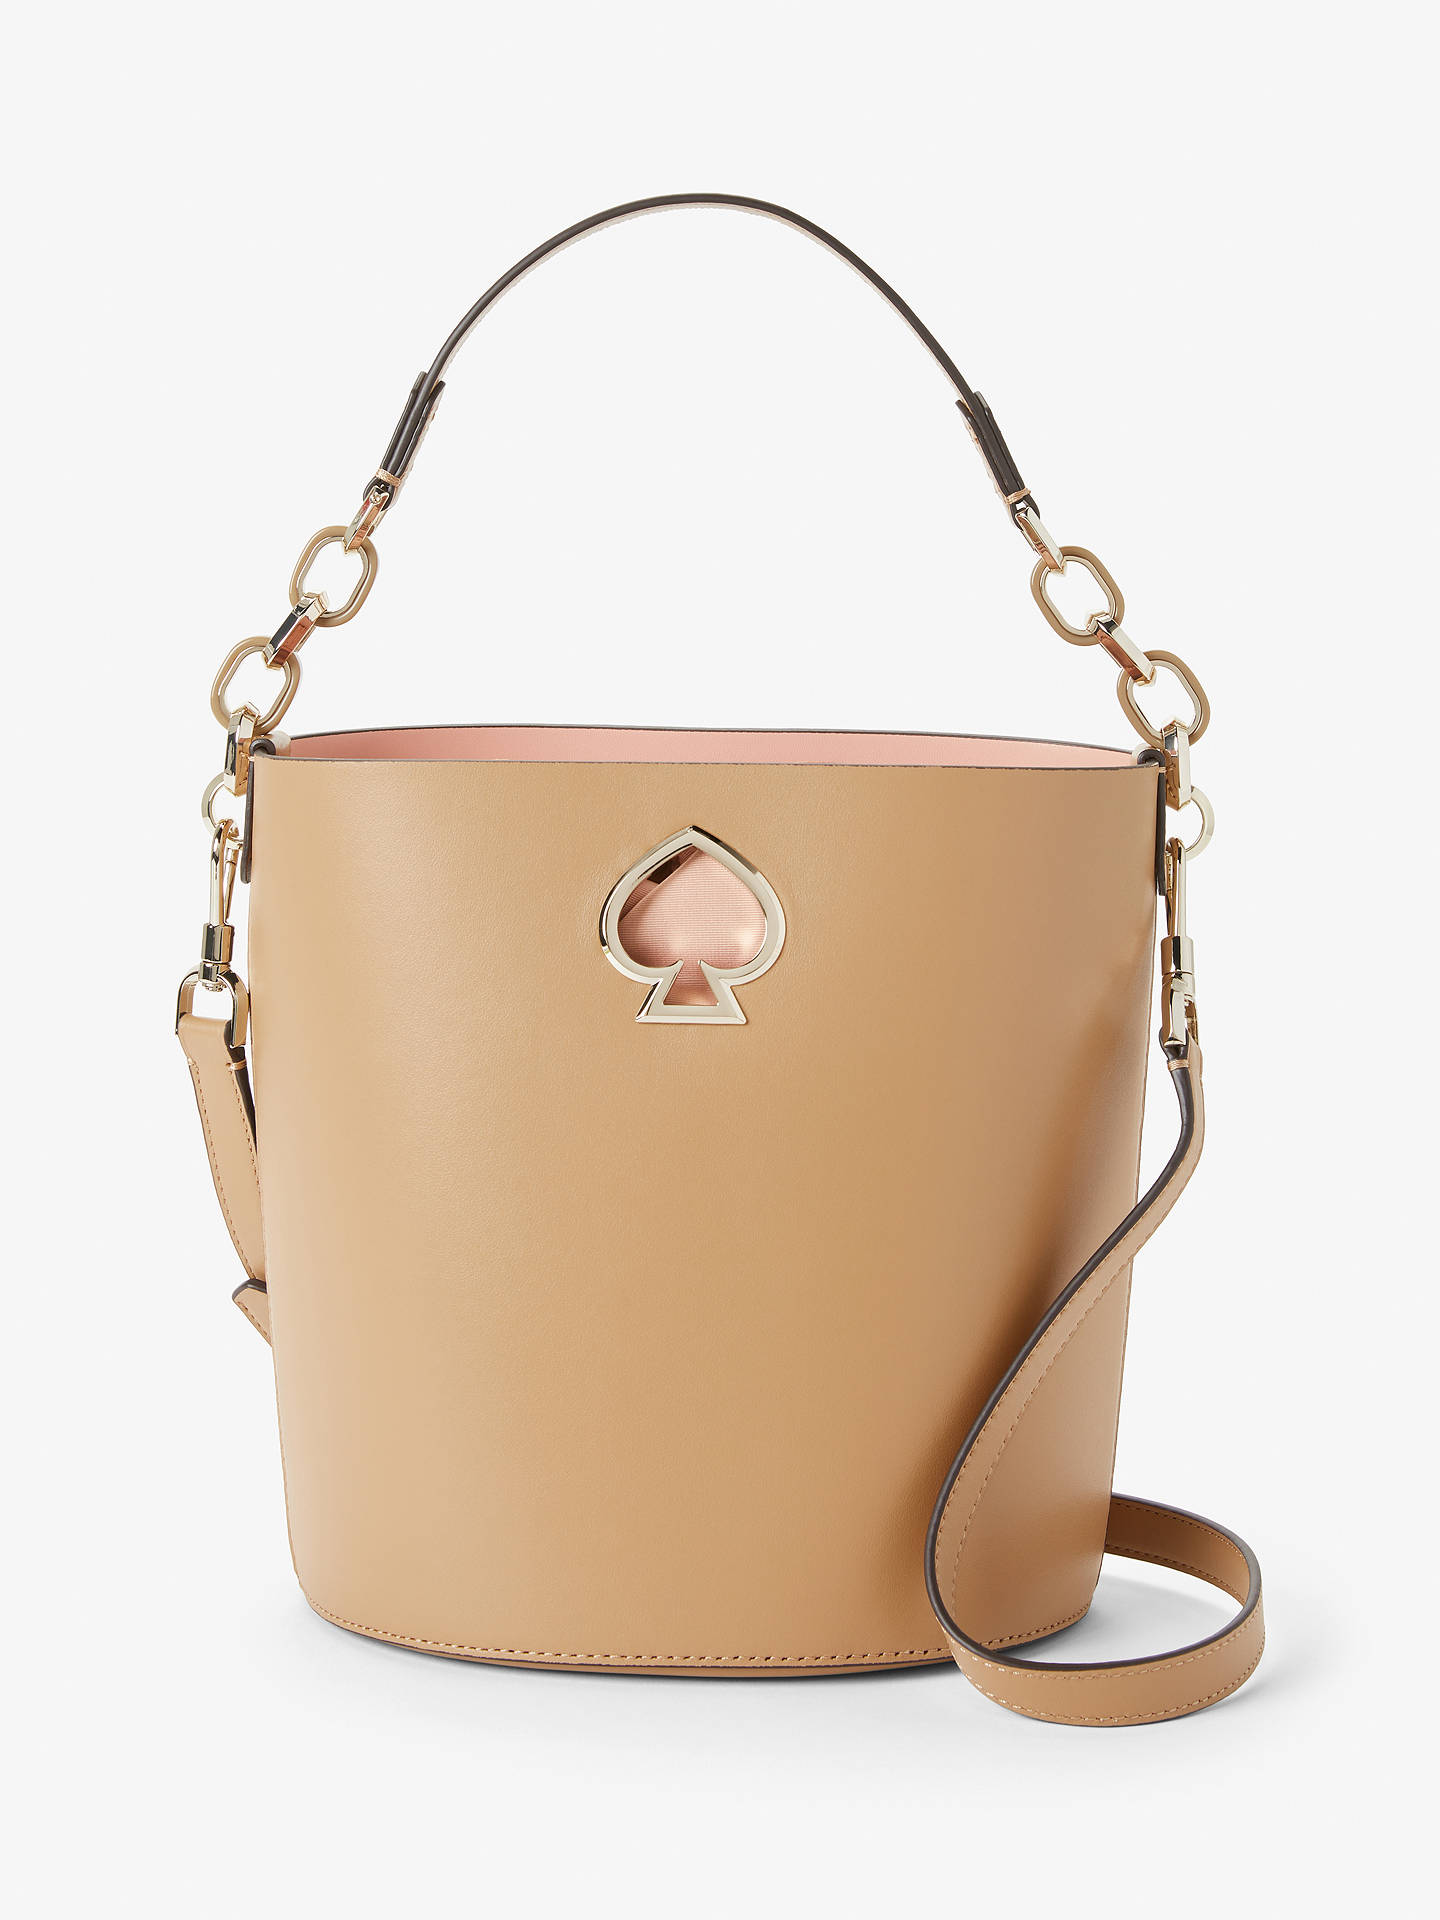 kate spade new york Suzy Small Leather Bucket Bag at John Lewis & Partners